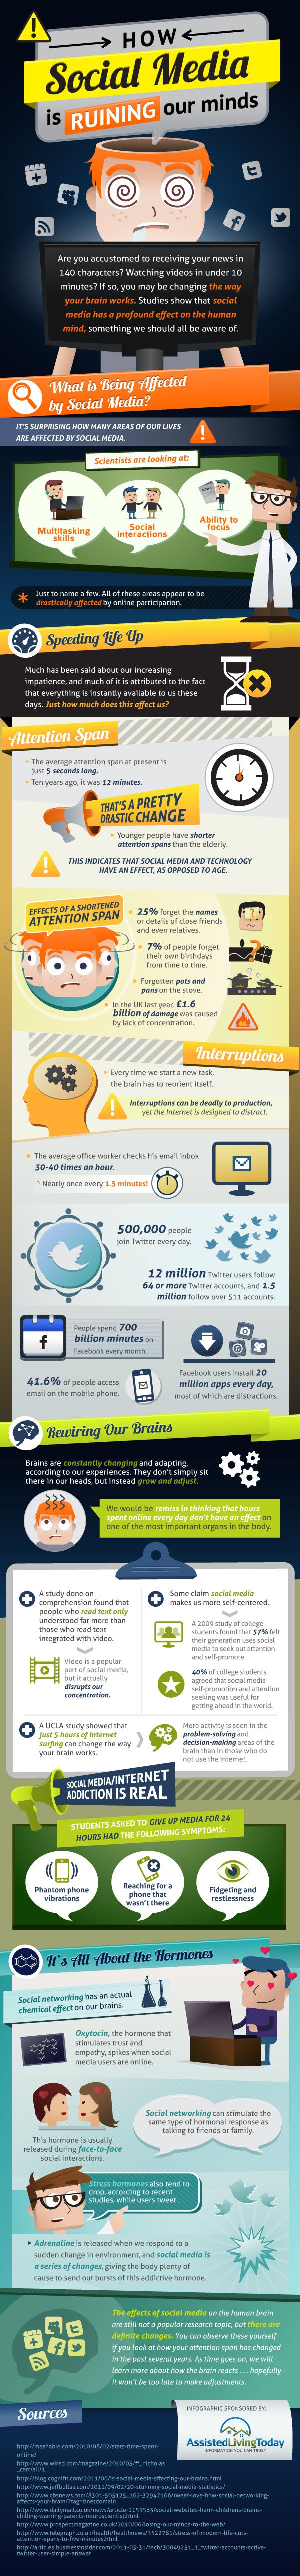 Is Social Media Ruining Our Minds? [INFOGRAPHIC]